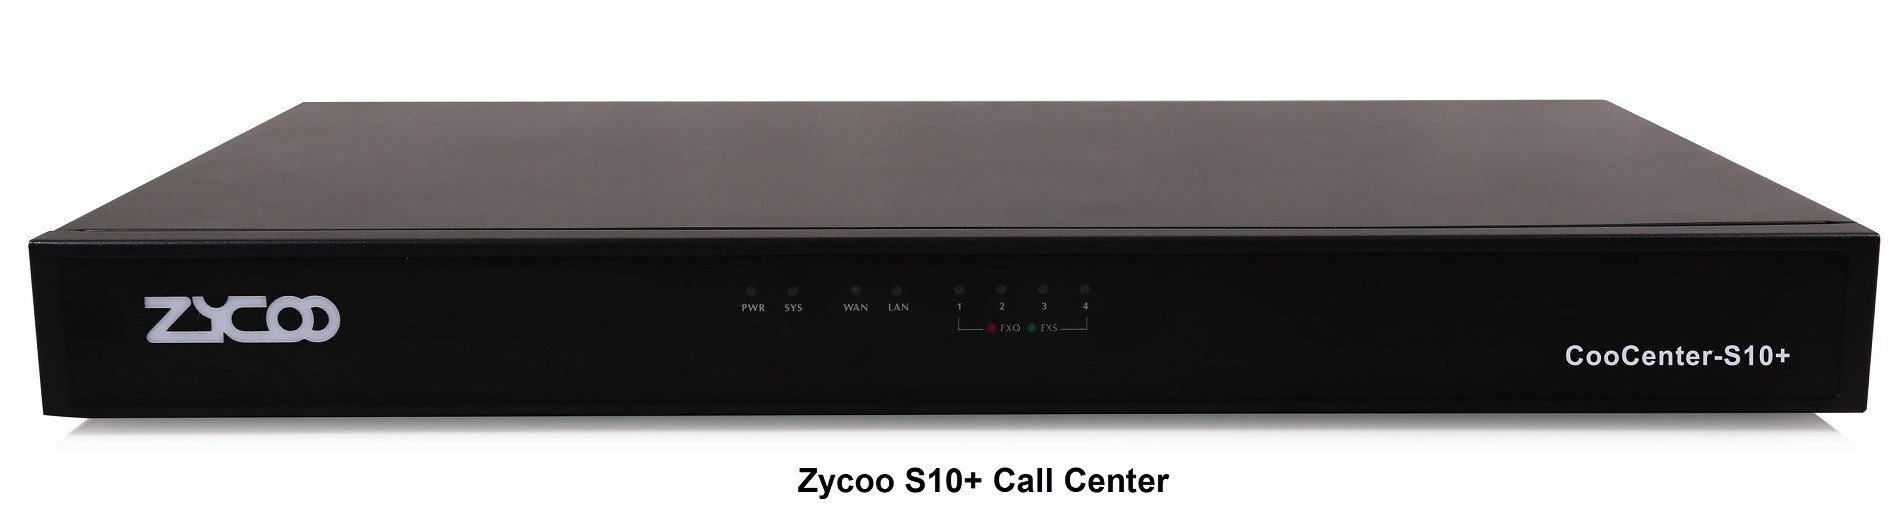 Zycoo Coo Center S10+ with 4FXO in built card, support up to 40 Extension and 20 Agent